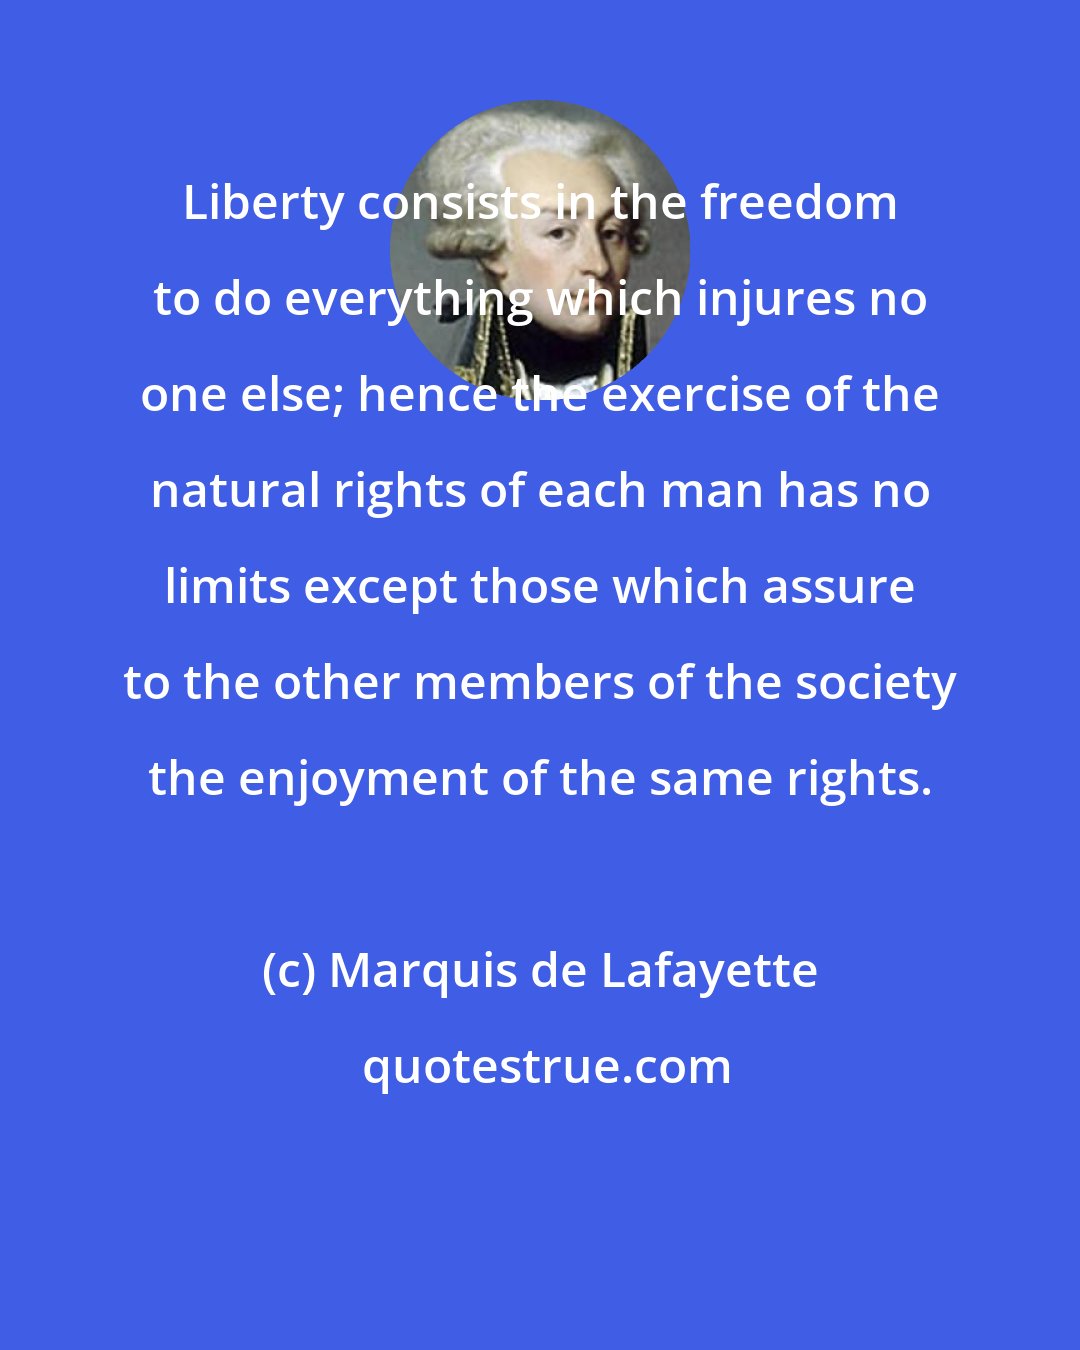 Marquis de Lafayette: Liberty consists in the freedom to do everything which injures no one else; hence the exercise of the natural rights of each man has no limits except those which assure to the other members of the society the enjoyment of the same rights.